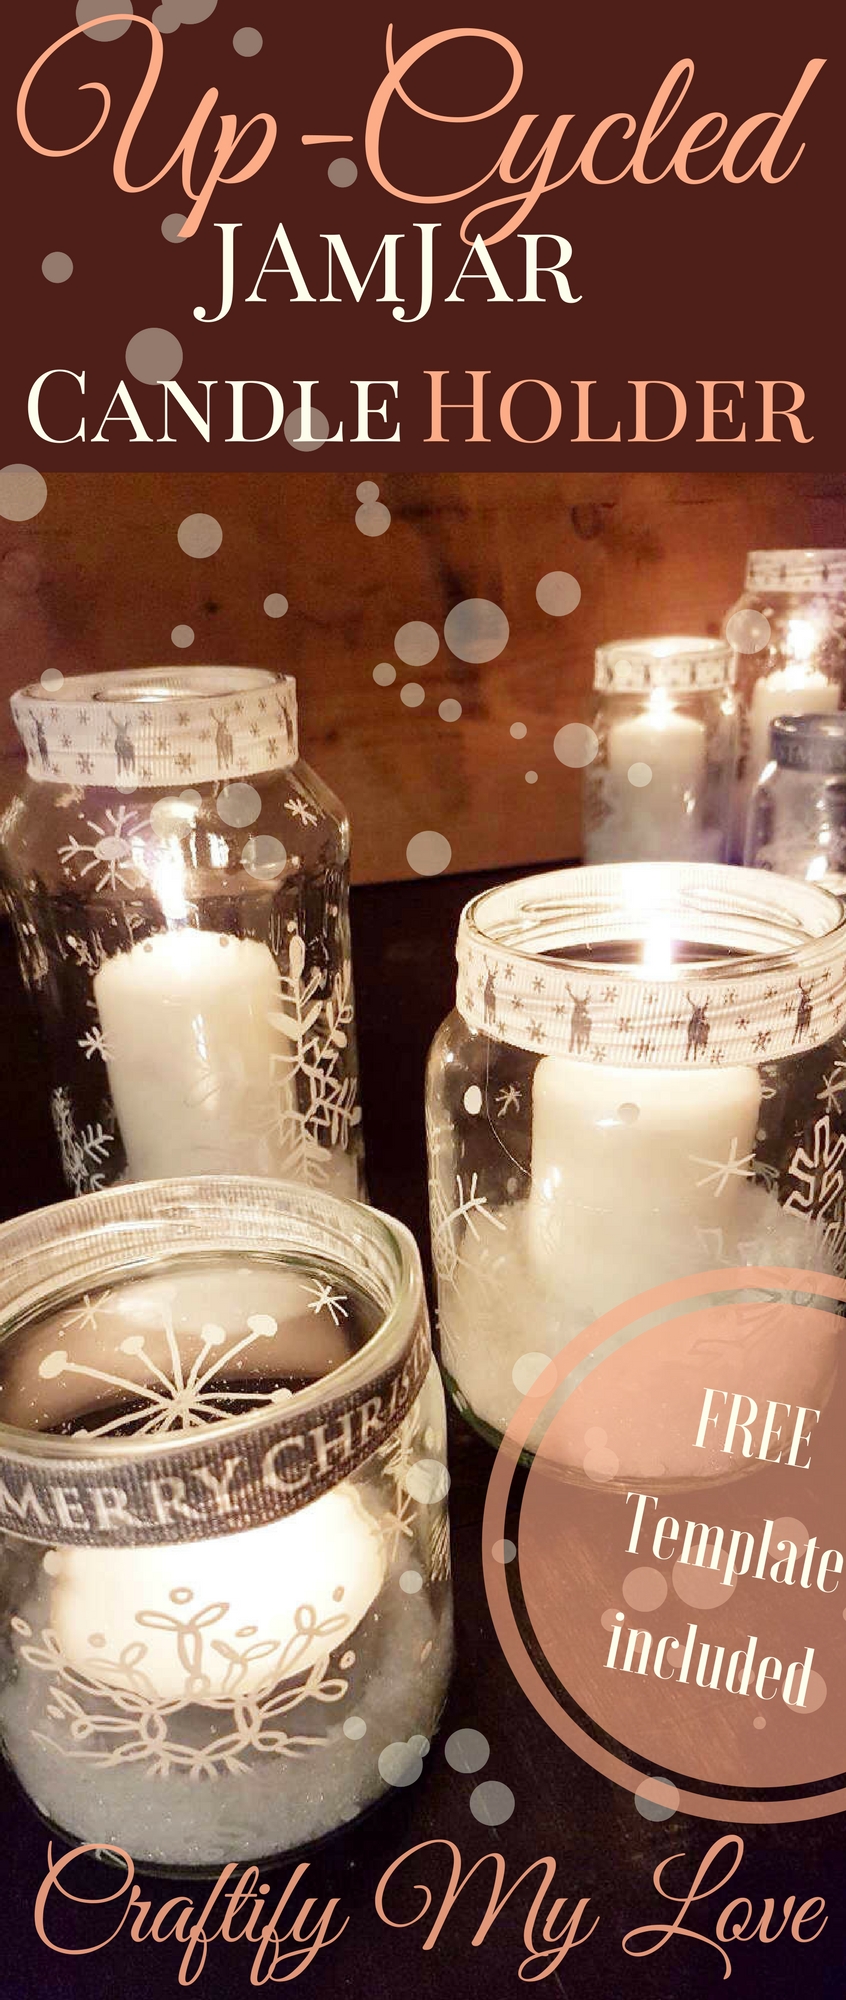 Learn how to upcycle empty jam jars into all white snowflake candle holders. Click for step by step tutorial + FREE Template. | #winterwonderland #winterdecor #candleholders #wintercrafts #upcycling #upcyclingjars #freetemplate #snowflaketemplate